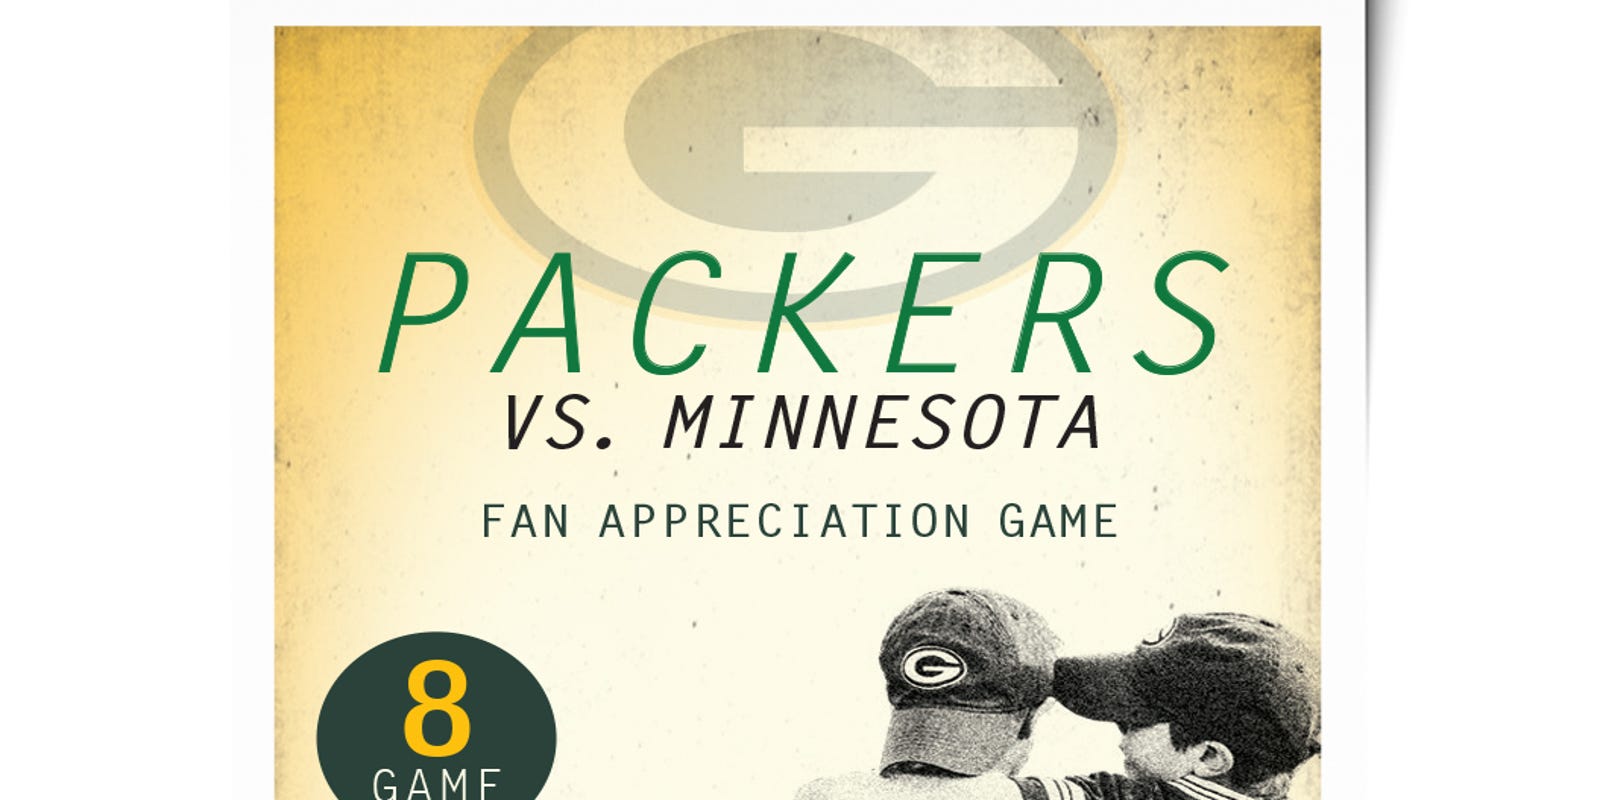 Green Bay Packers game-ticket photo contest returns for eighth year